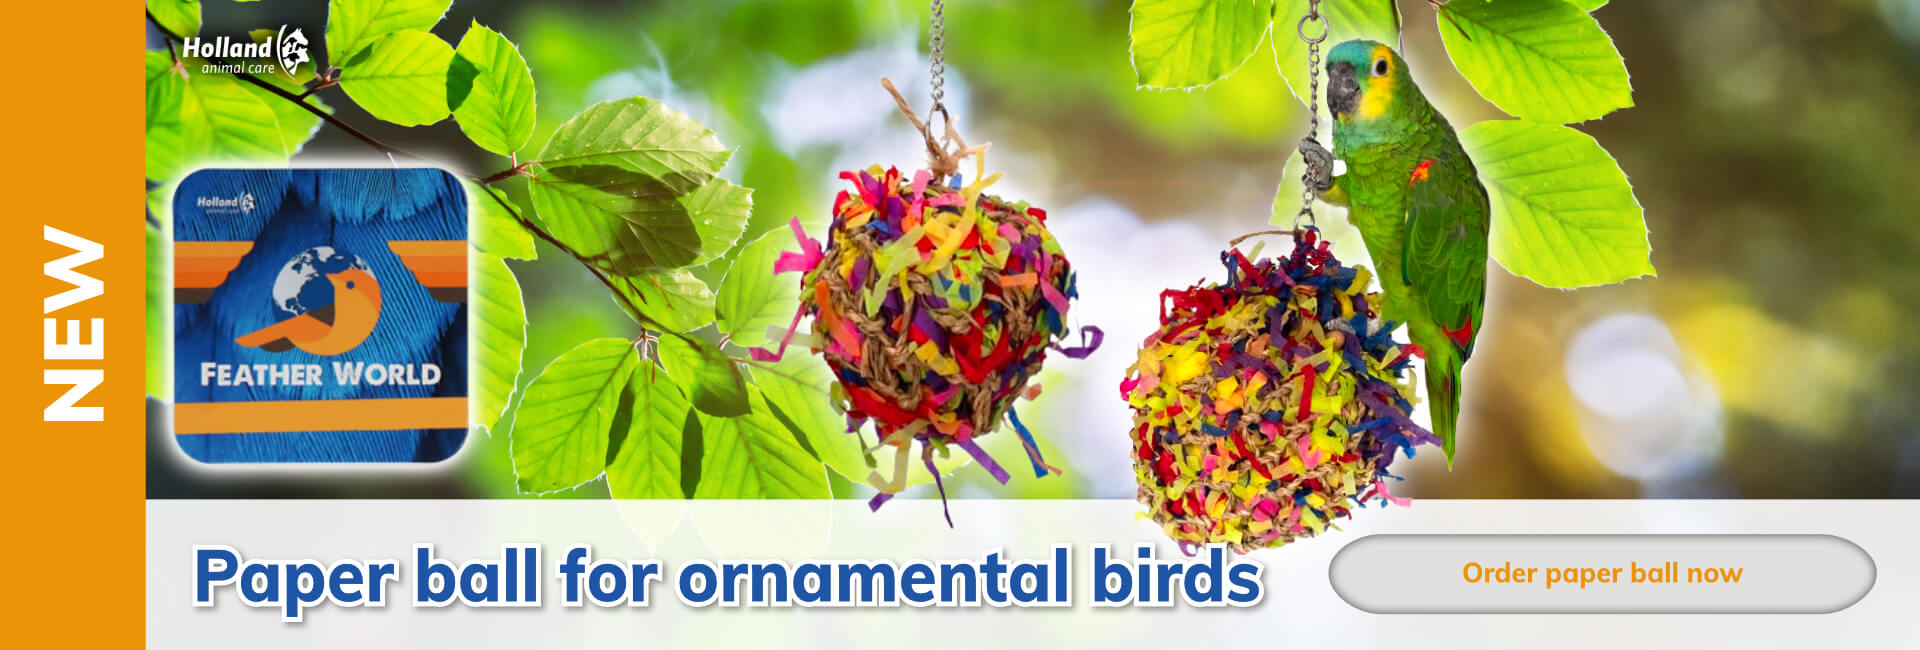 Holland Animal Care Paper ball for ornamental birds